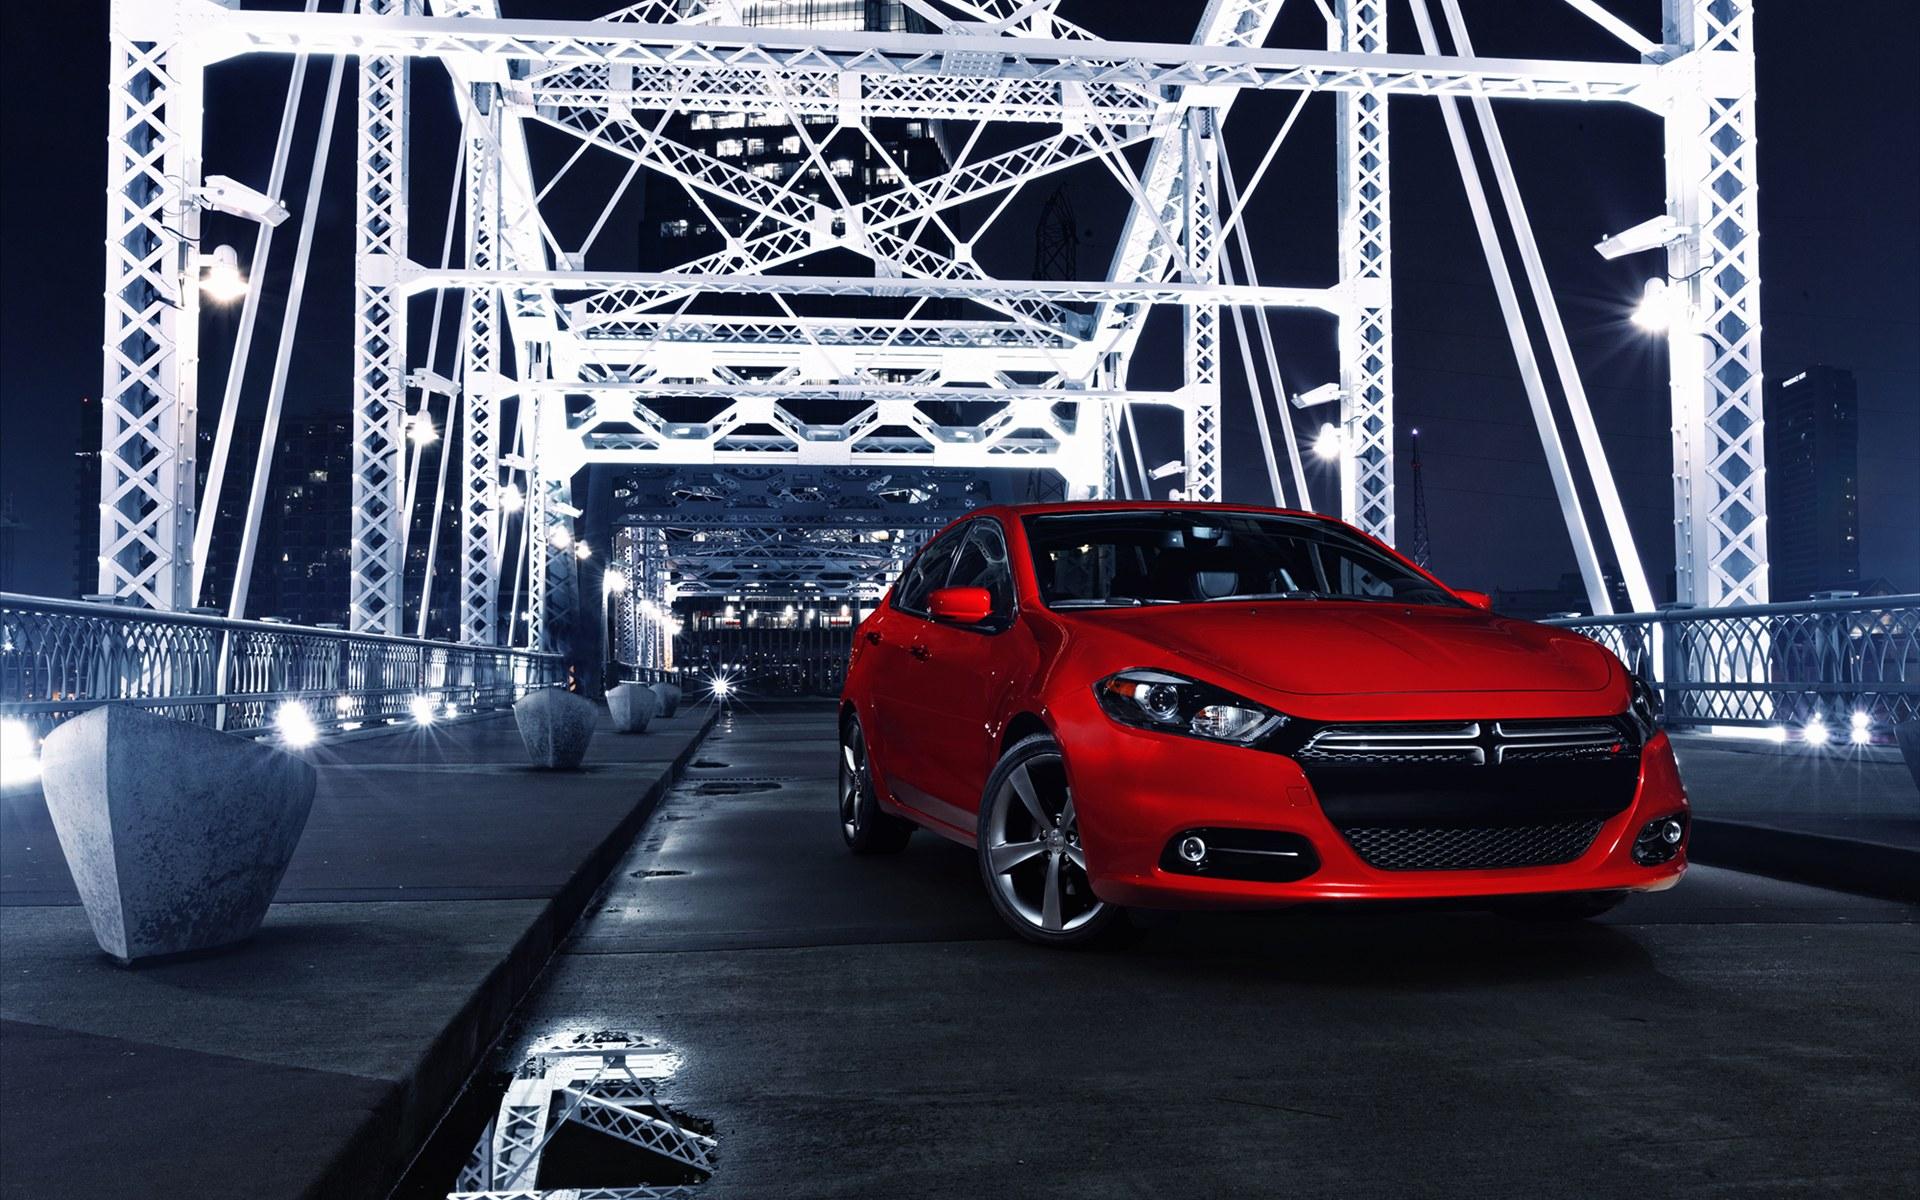 Photo for Dodge Dart HD (Top on S.C. Galleries 20180617)